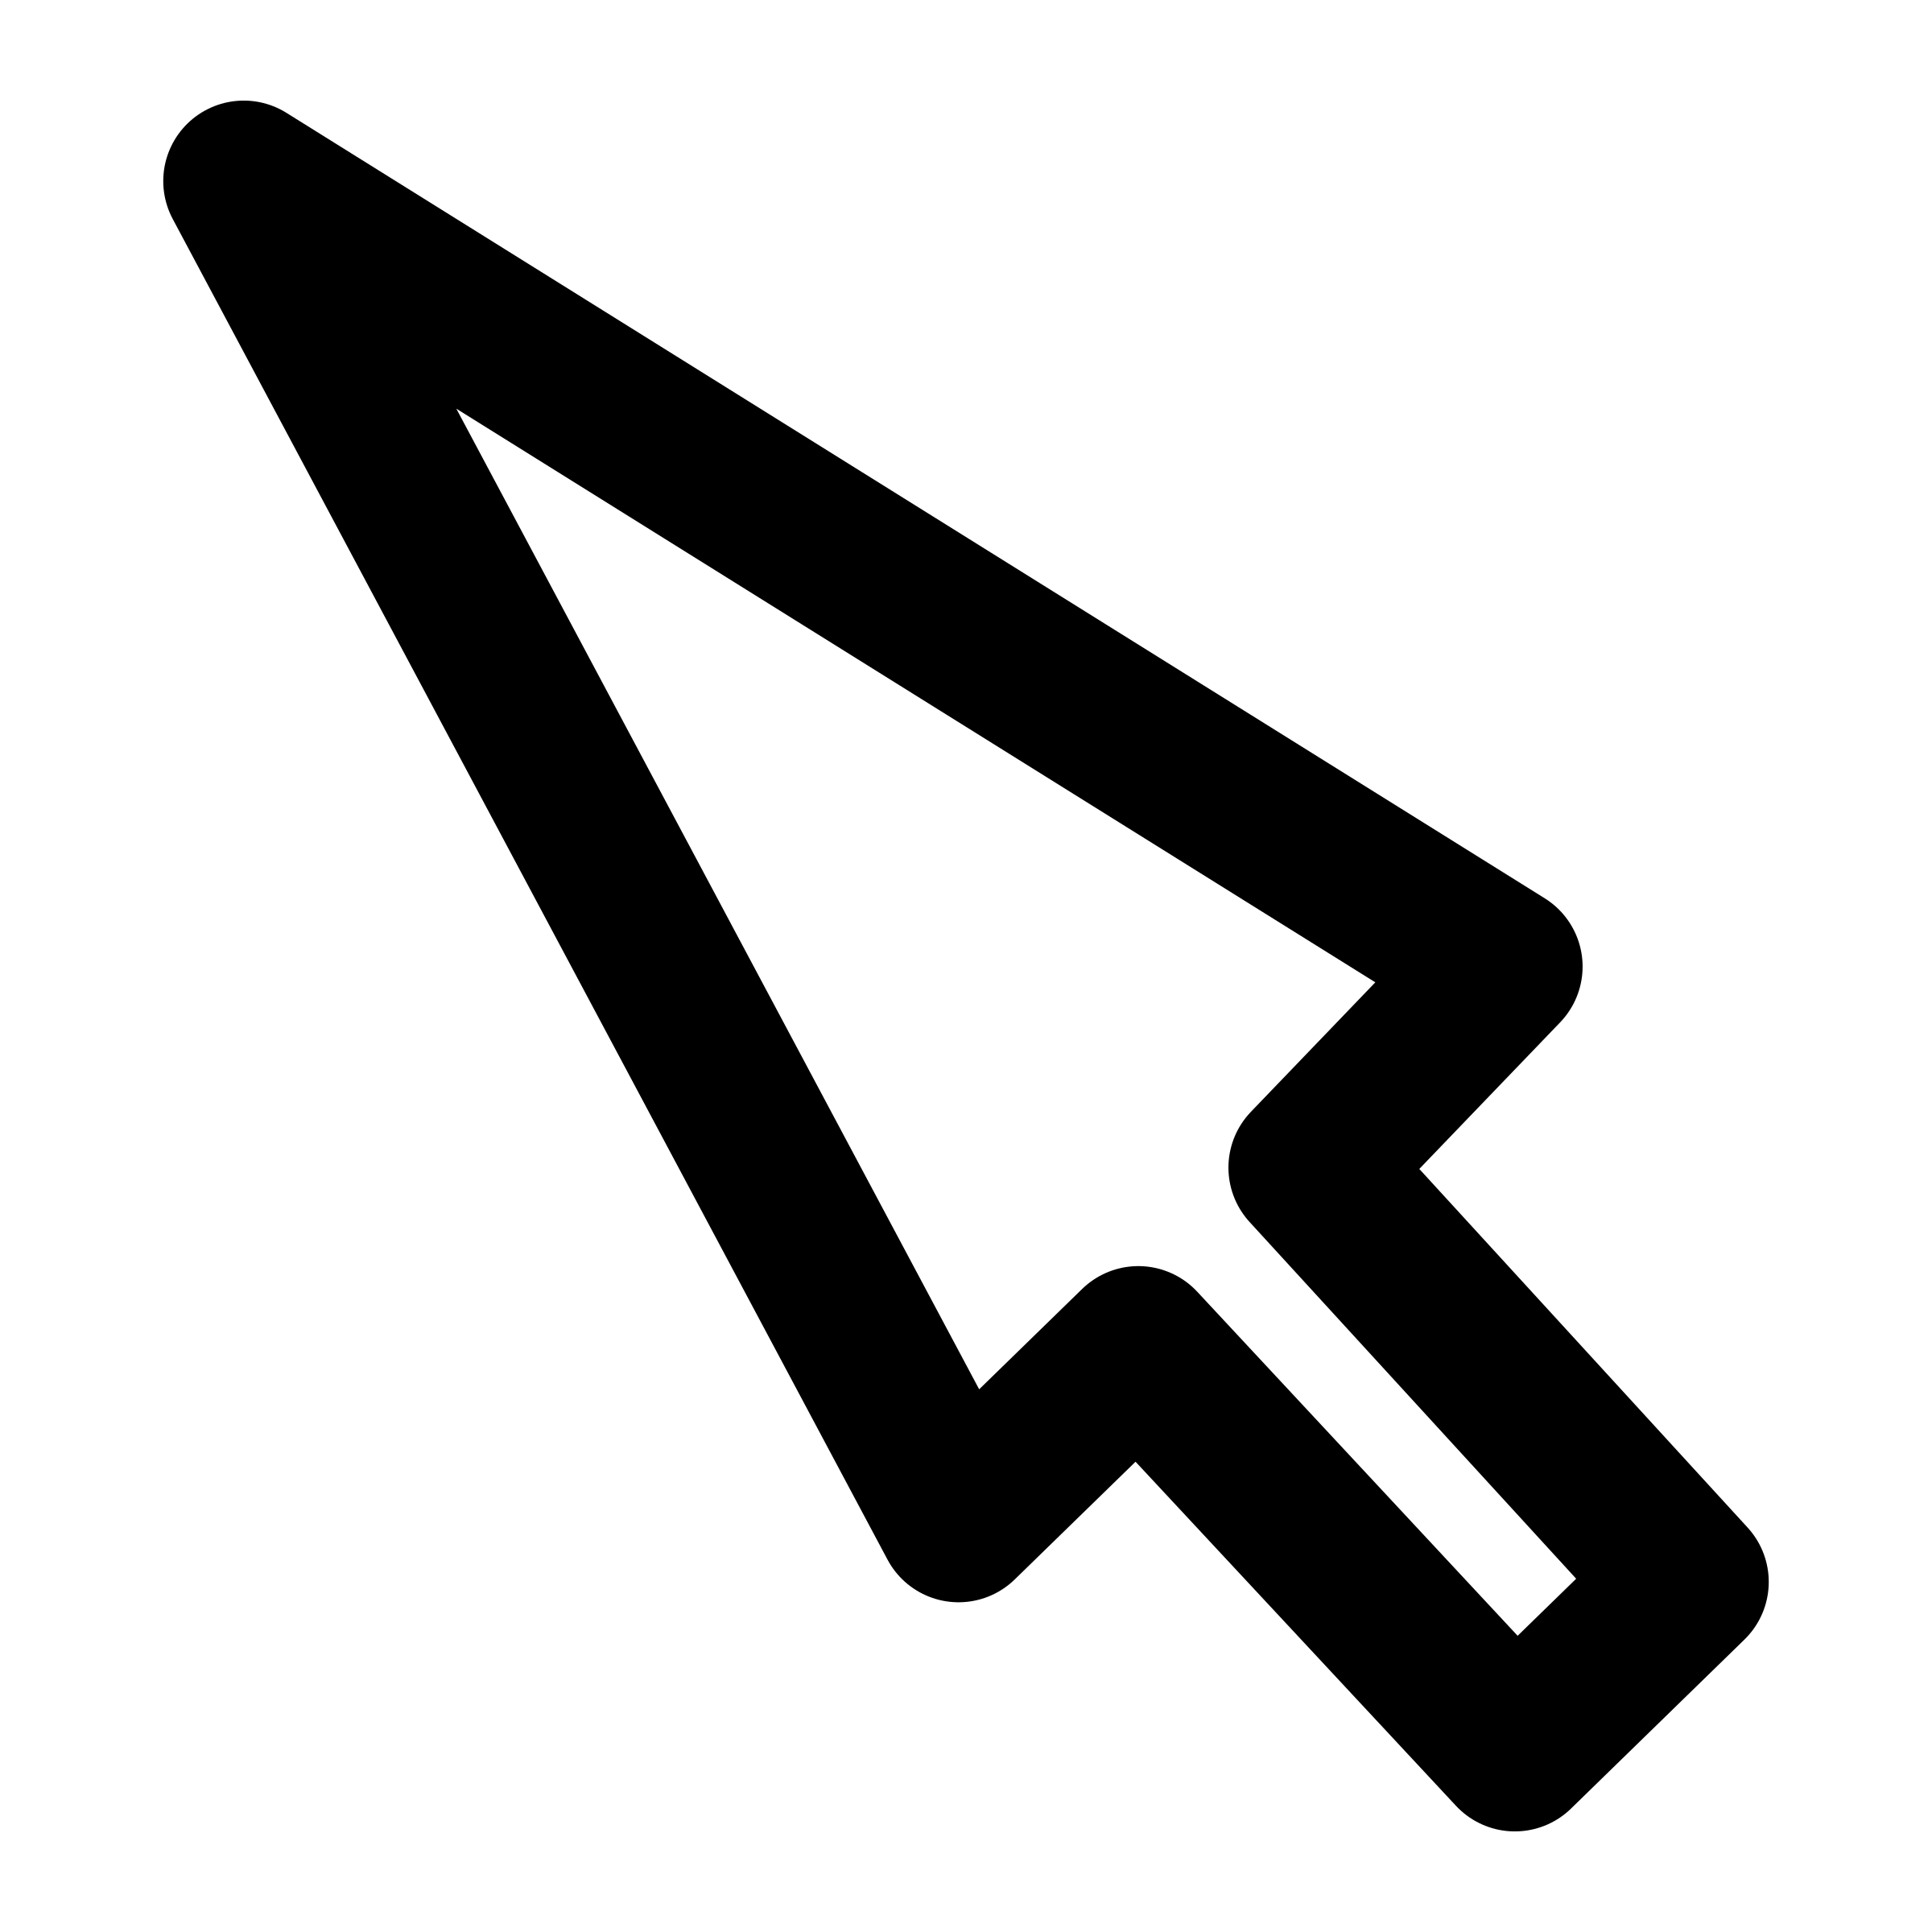 Windows mouse cursor png. Image with transparent background